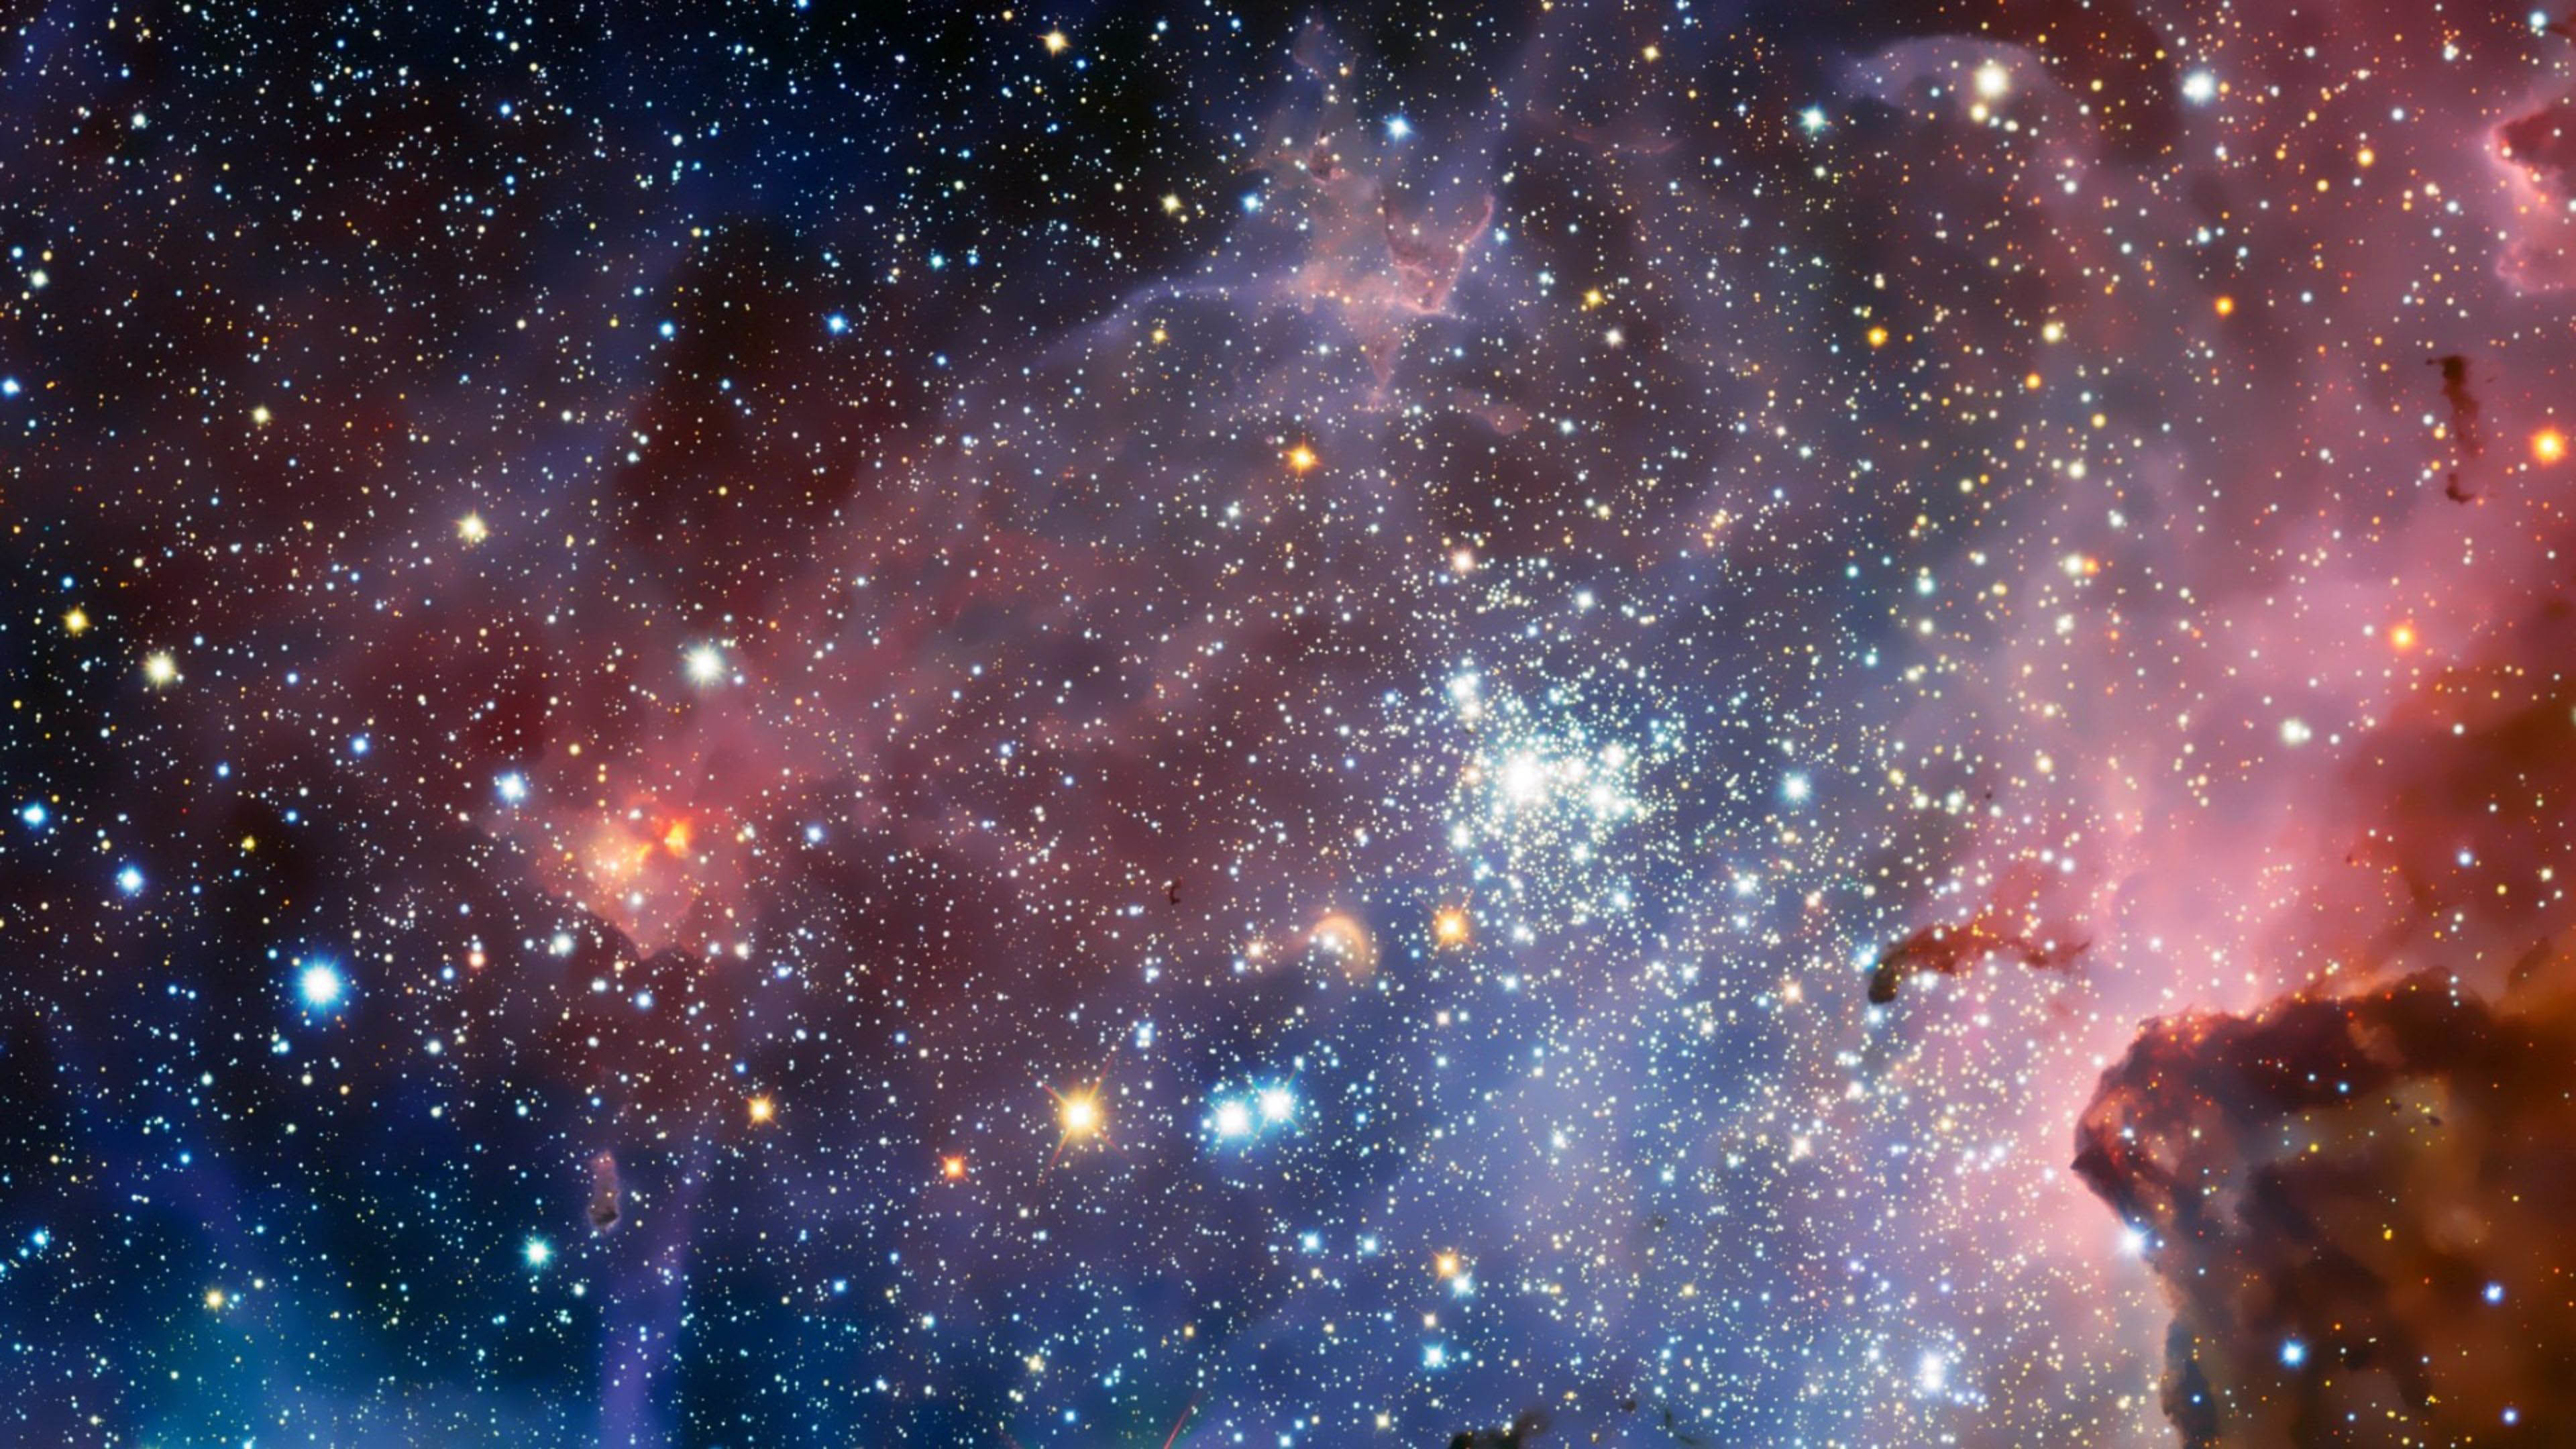 3840x2160 Download Galaxy Awesome 1080p Wide Desktop HD Wallpapers, Amazing Space  Background Pictures for Computers, Beautiful Twinkling Crystal Stars  Widescreen high ...